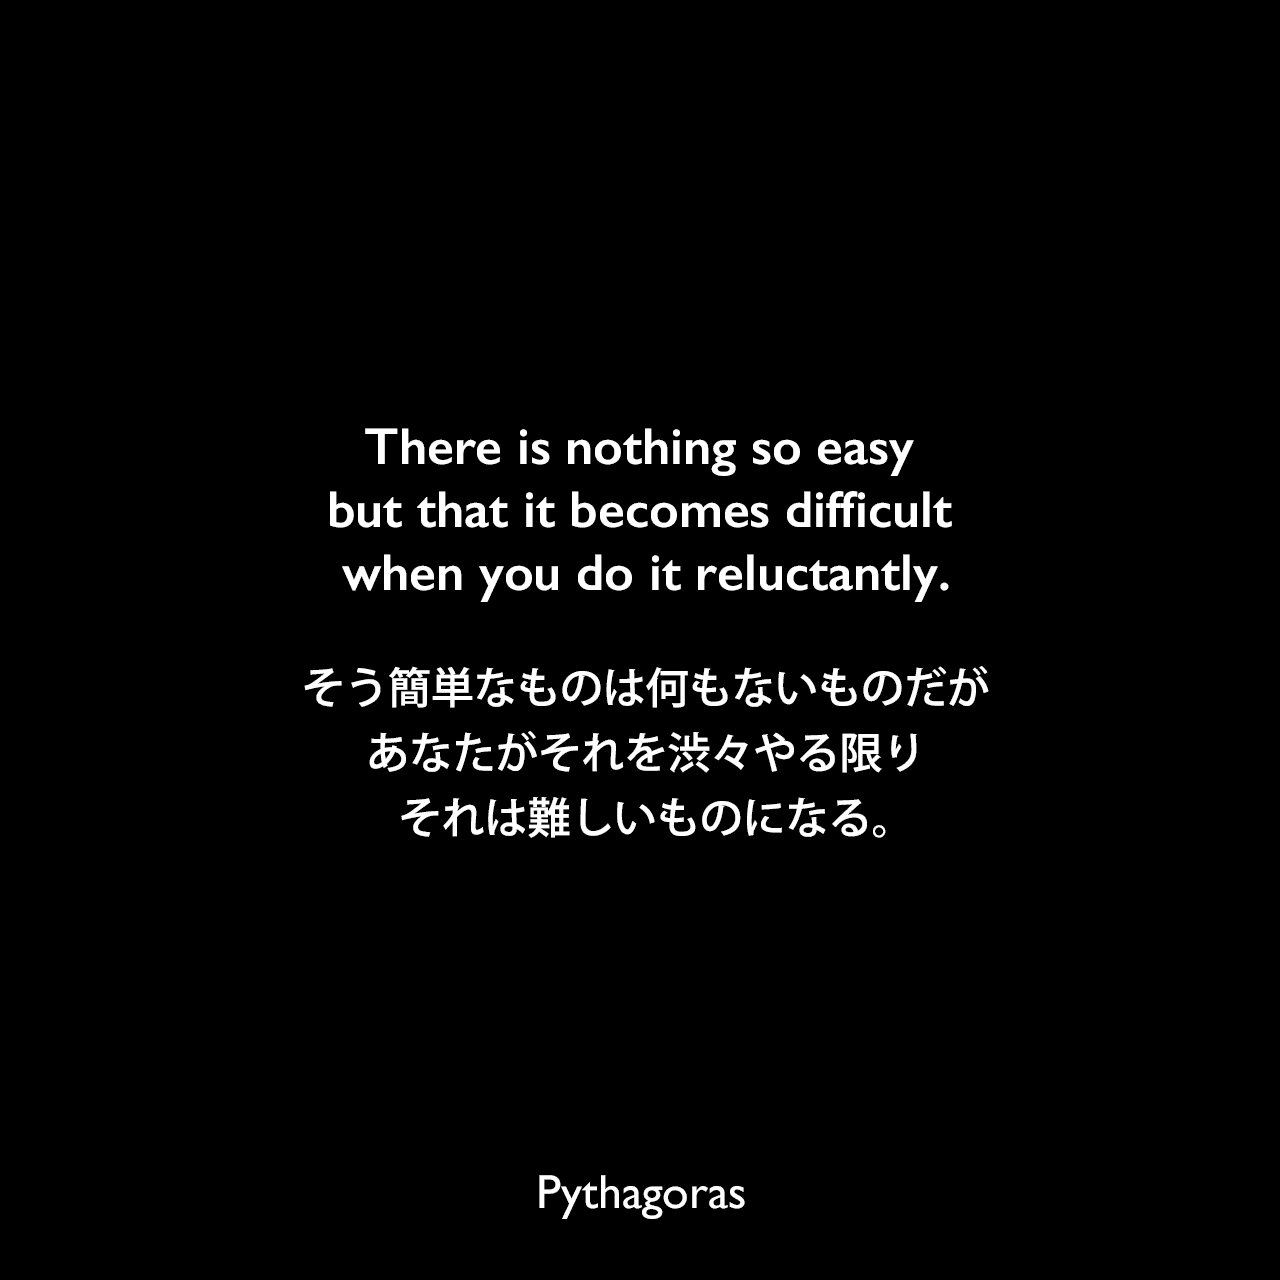 There is nothing so easy but that it becomes difficult when you do it reluctantly.そう簡単なものは何もないものだが、あなたがそれを渋々やる限り、それは難しいものになる。Pythagoras